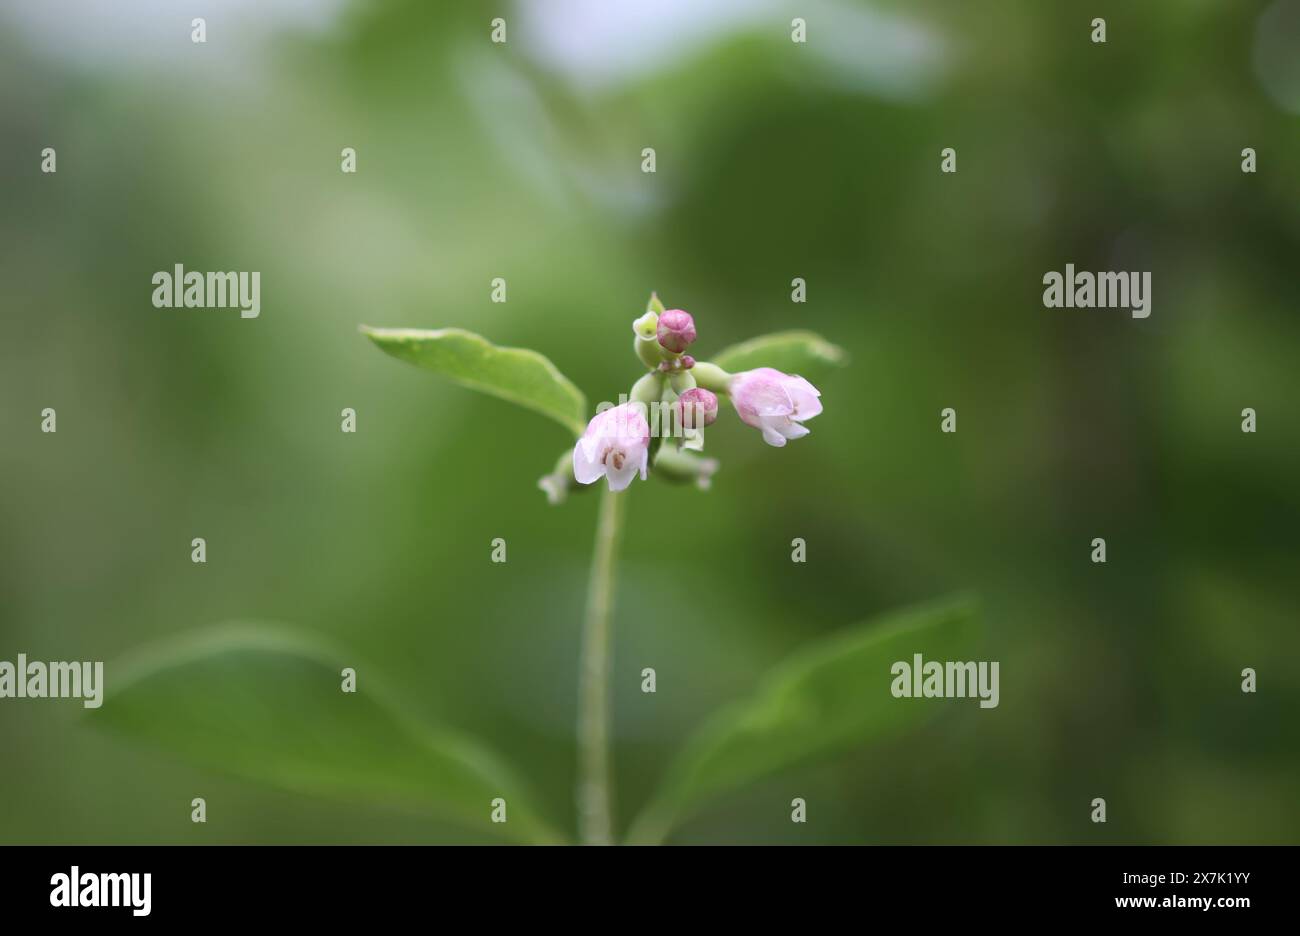 Rain drops on the leaves of the snowberry bush. Stock Photo